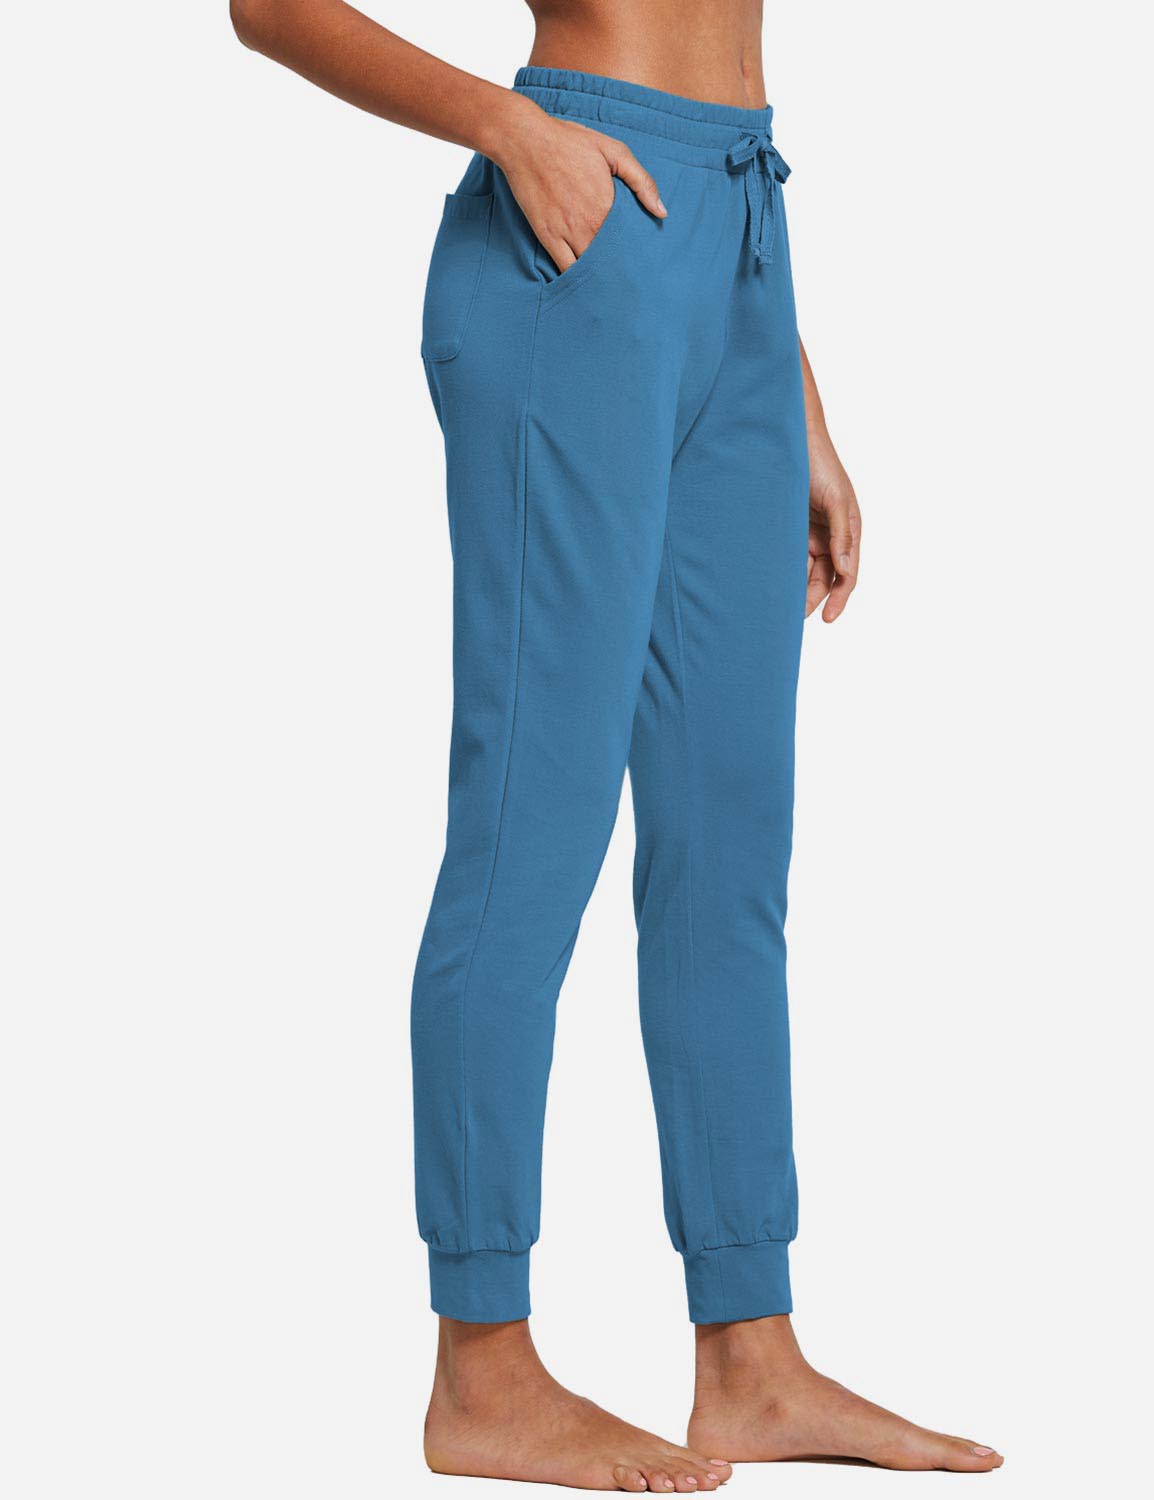 Baleaf Women's Cotton Comfy Pocketed & Tapered Weekend Joggers abh103 Sea Blue  Side